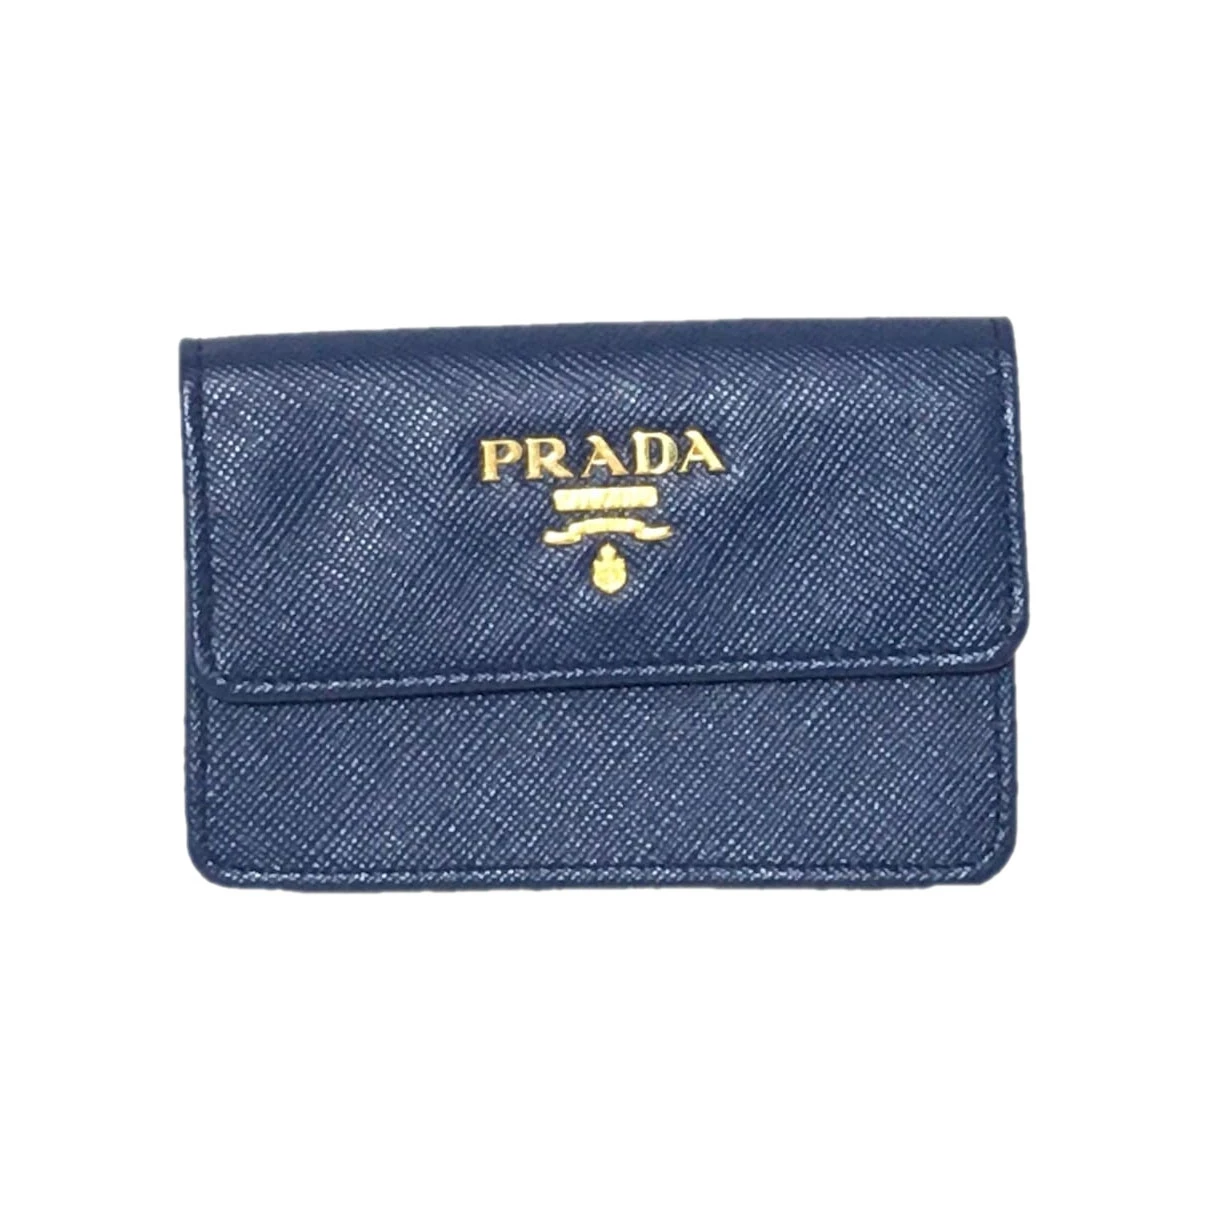 Pre-owned Prada Leather Purse In Navy